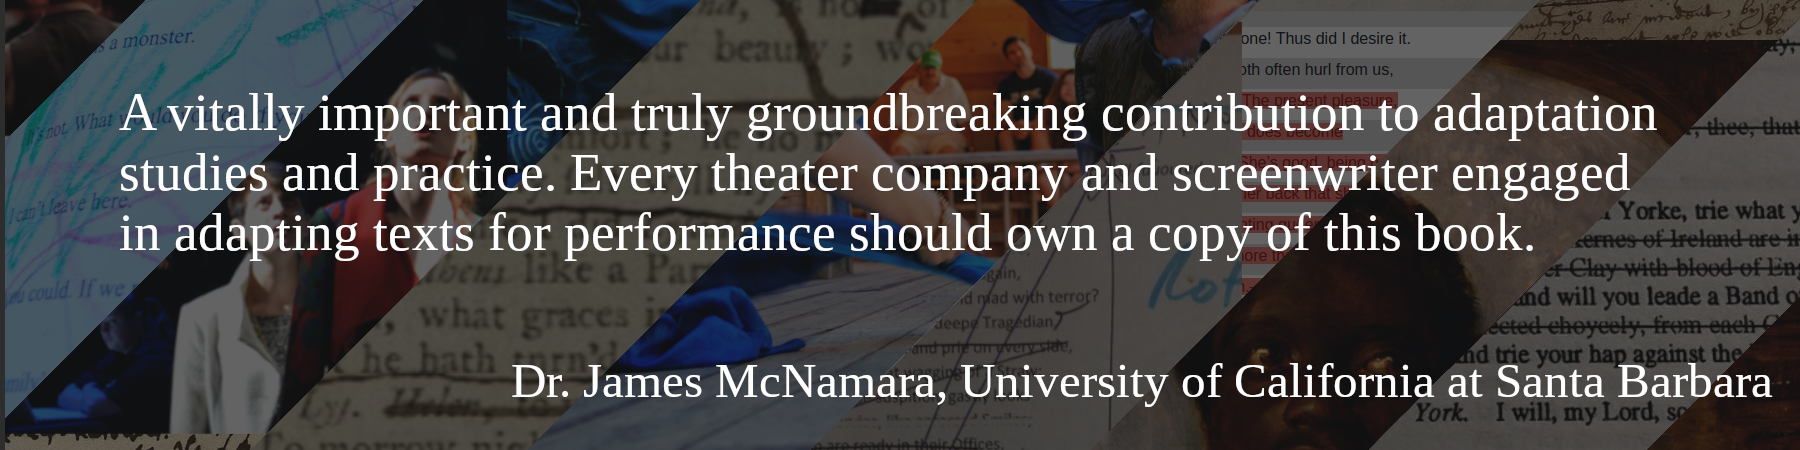 A vitally important and truly groundbreaking contribution to adaptation studies and practice. Every theater company and screenwriter engaged in adapting texts for performance should own a copy of this book.--Dr. James McNamara, University of California at Santa Barbara